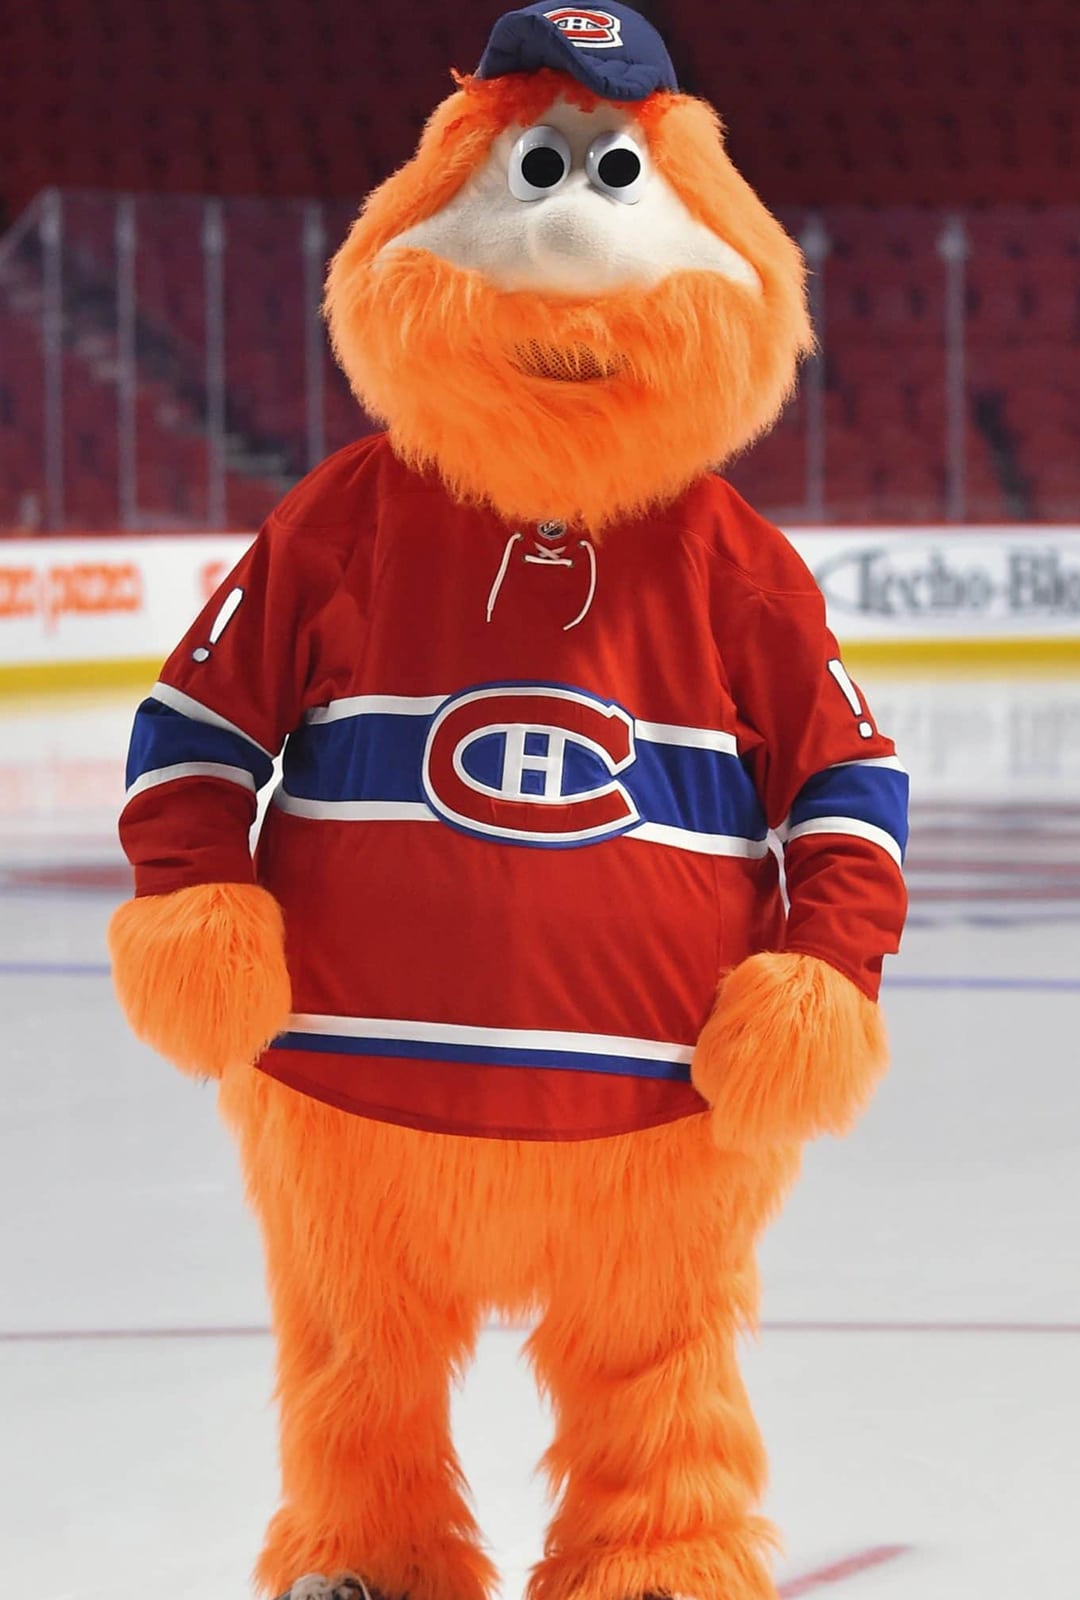 Youppi of the Canadiens de Montreal